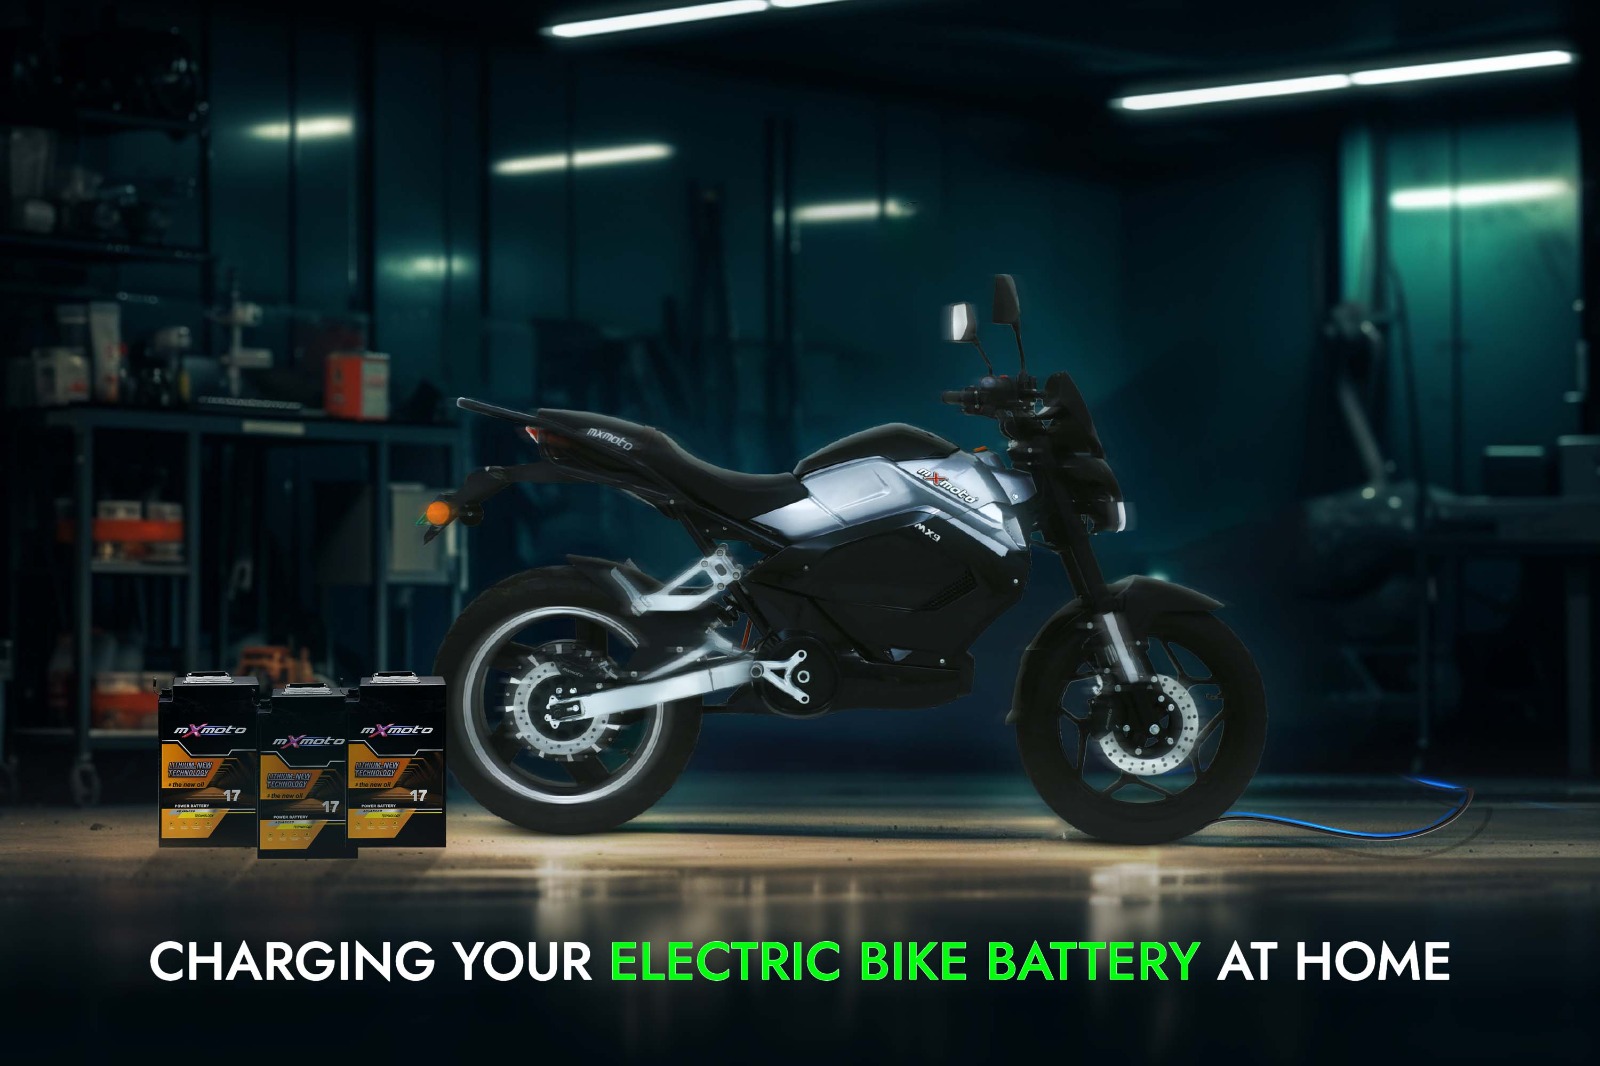 Is It Safe to Charge an Electric Bike Battery at Home?